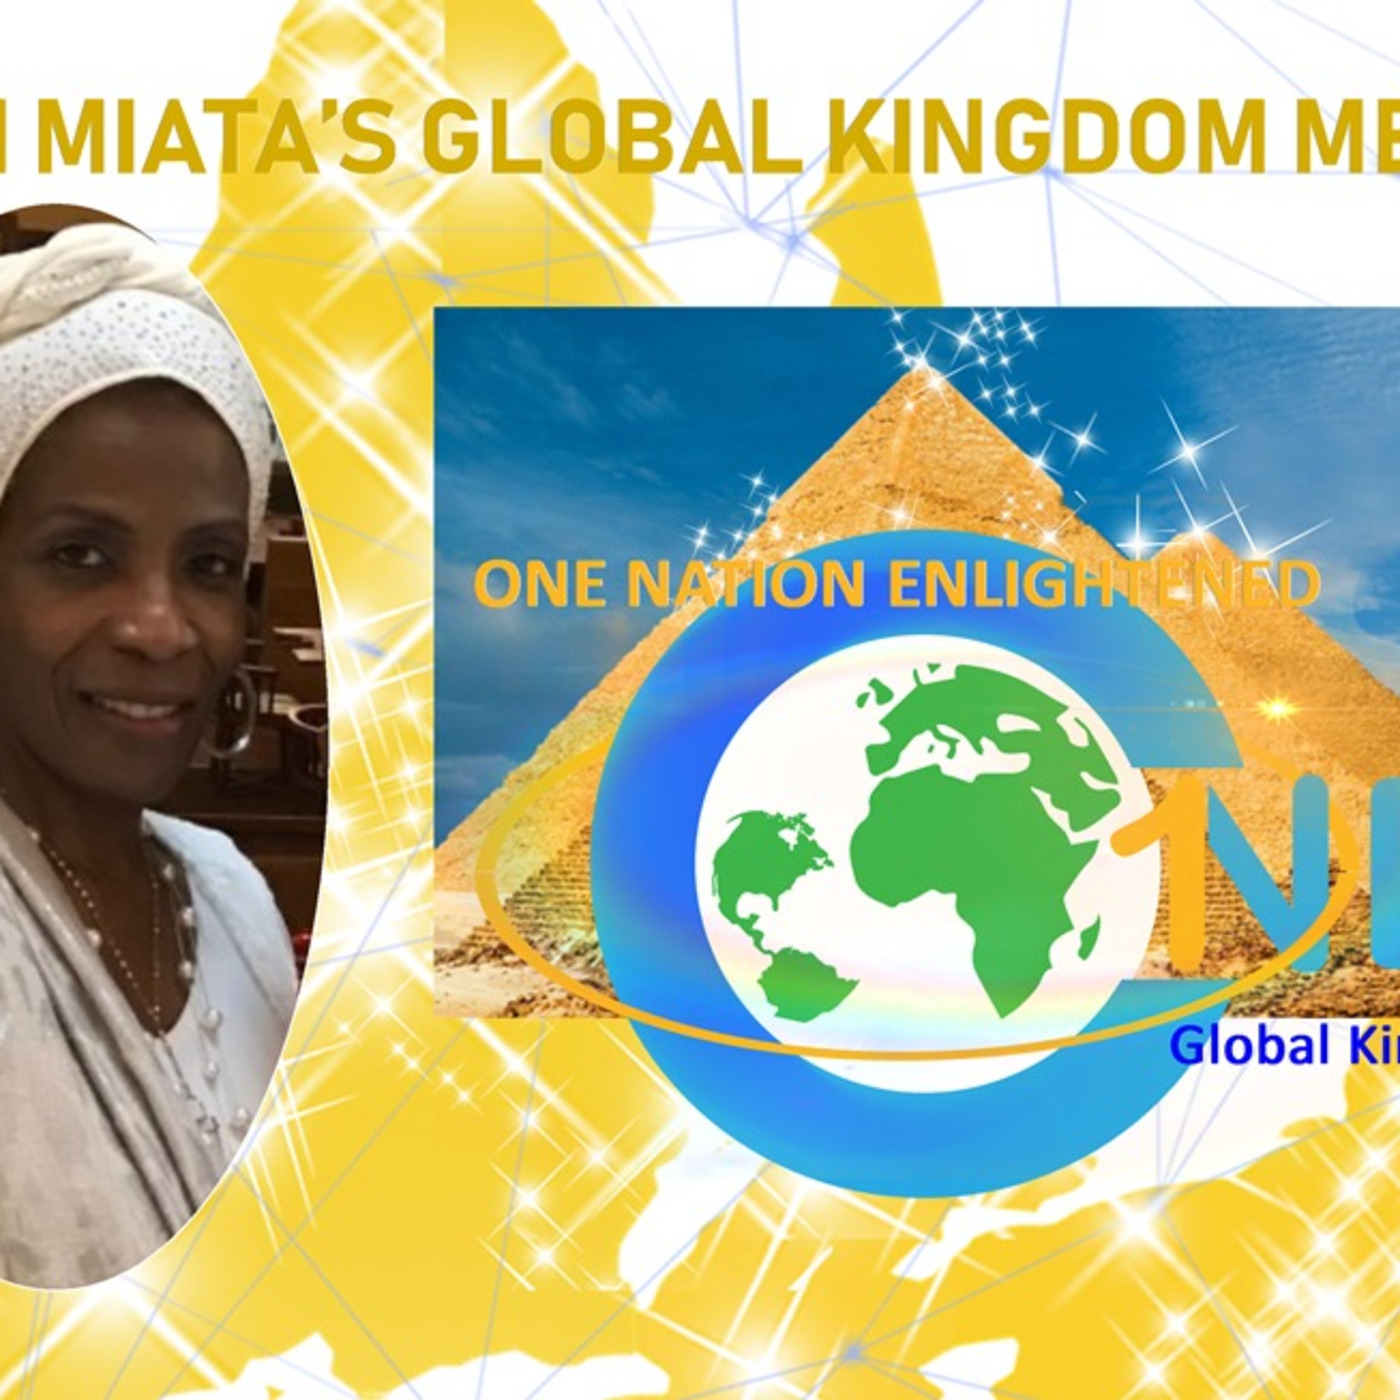 QUEEN MIATA’S GLOBAL KINGDOM MESSAGE (4.29.2020) For the Man who Thanks the Spiritual Father, knows Him